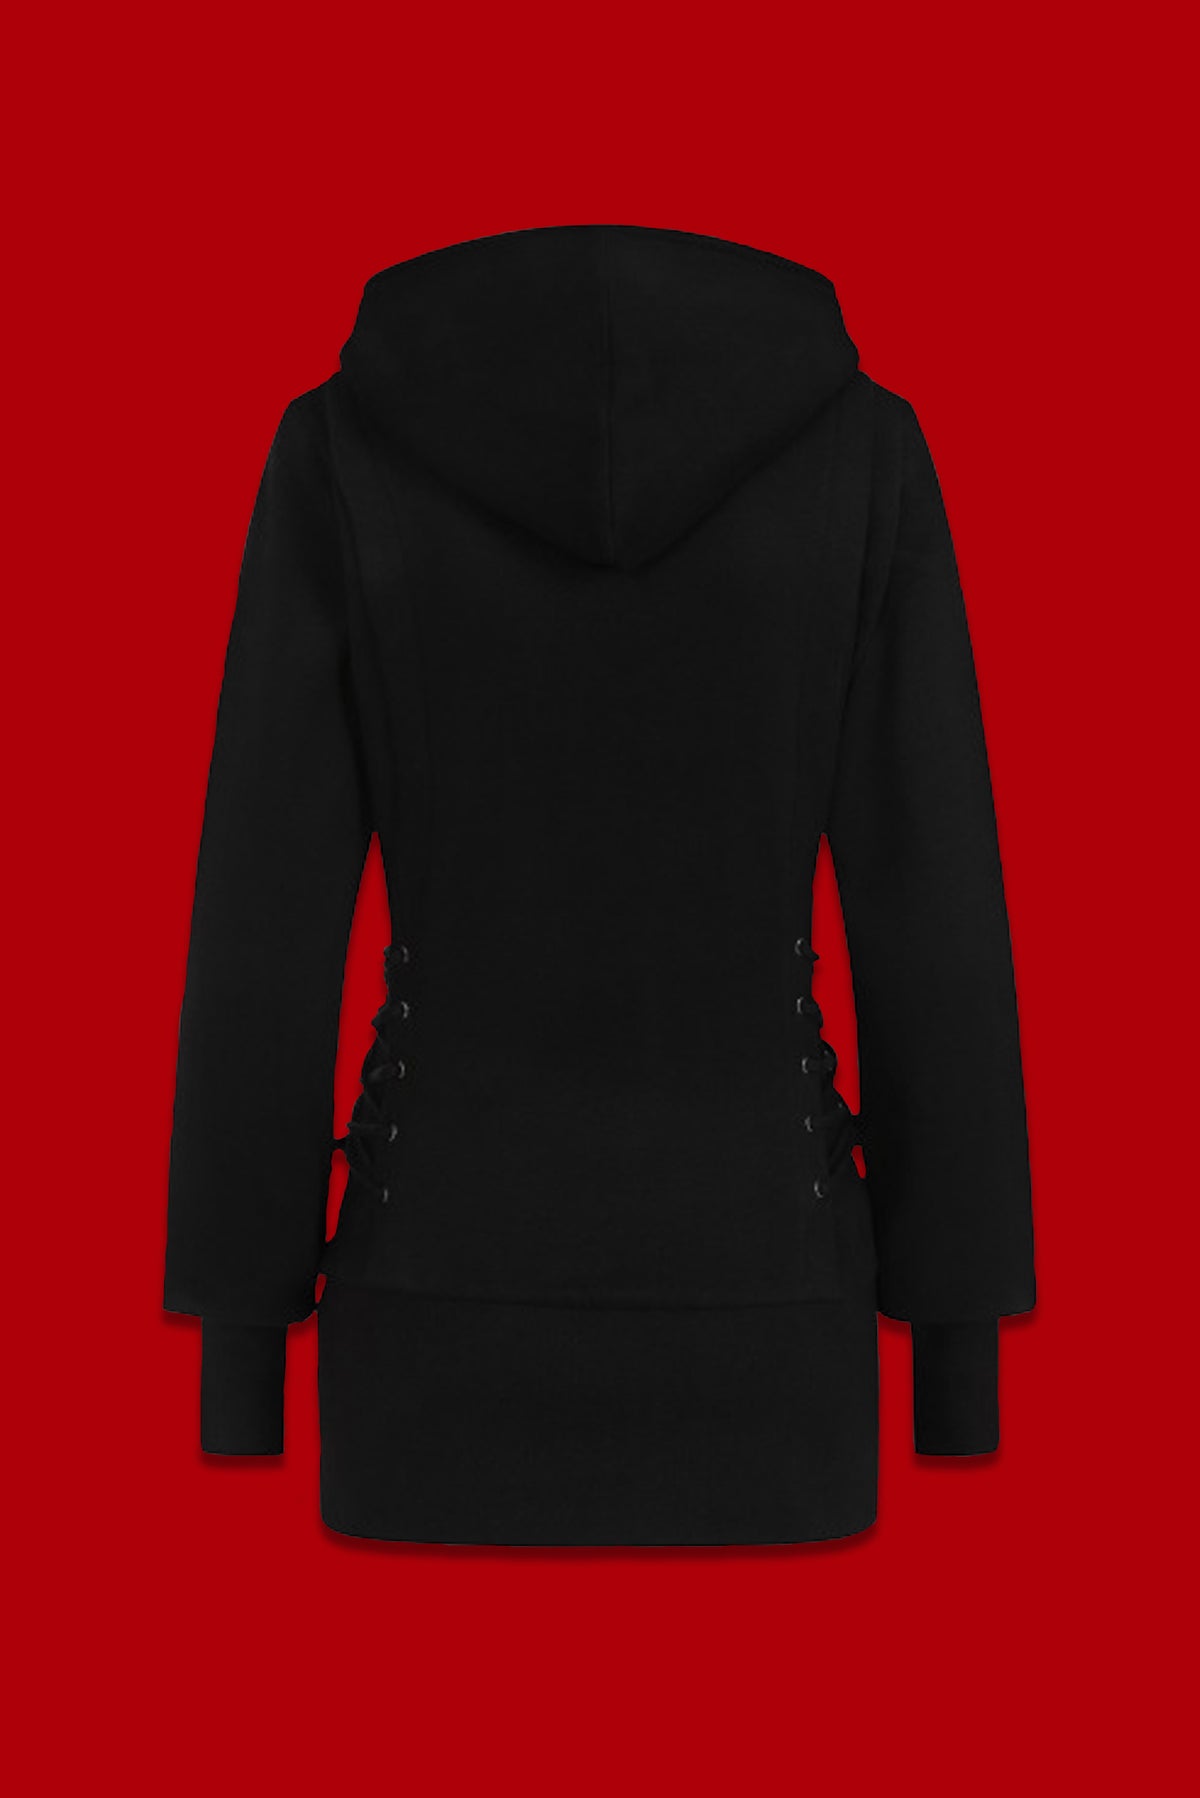 ONYX HOODIE - Simple yet luxury. We love solids! Now Available to